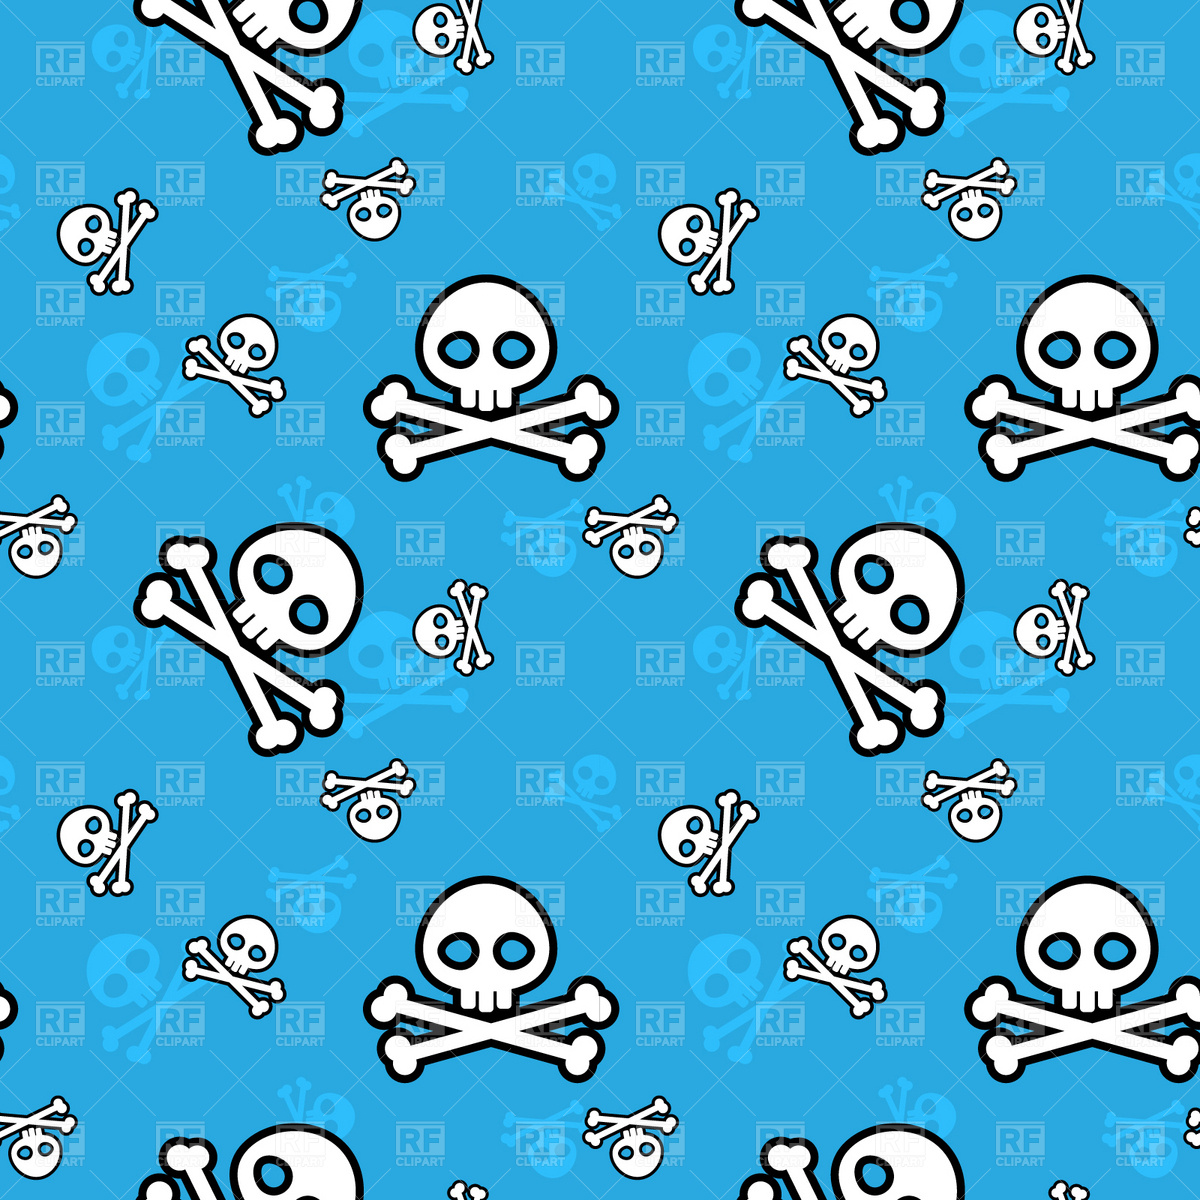 Skull And Crossbones Background 1731 Backgrounds Textures Abstract    